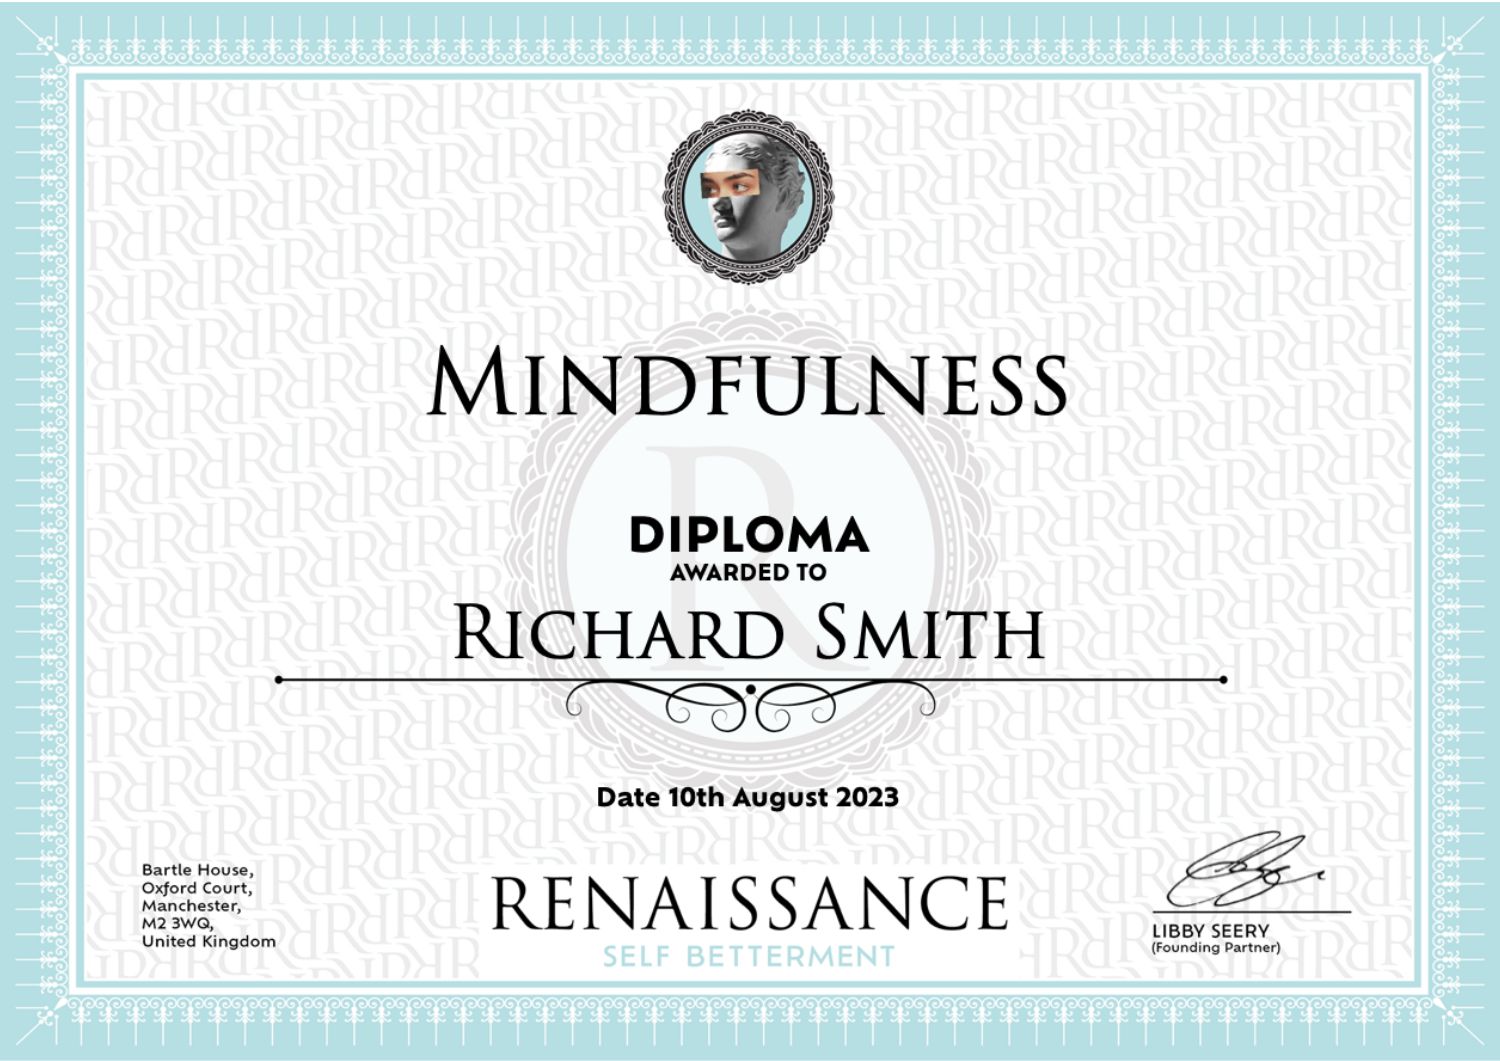 Example of diploma received following completion of mindfulness course